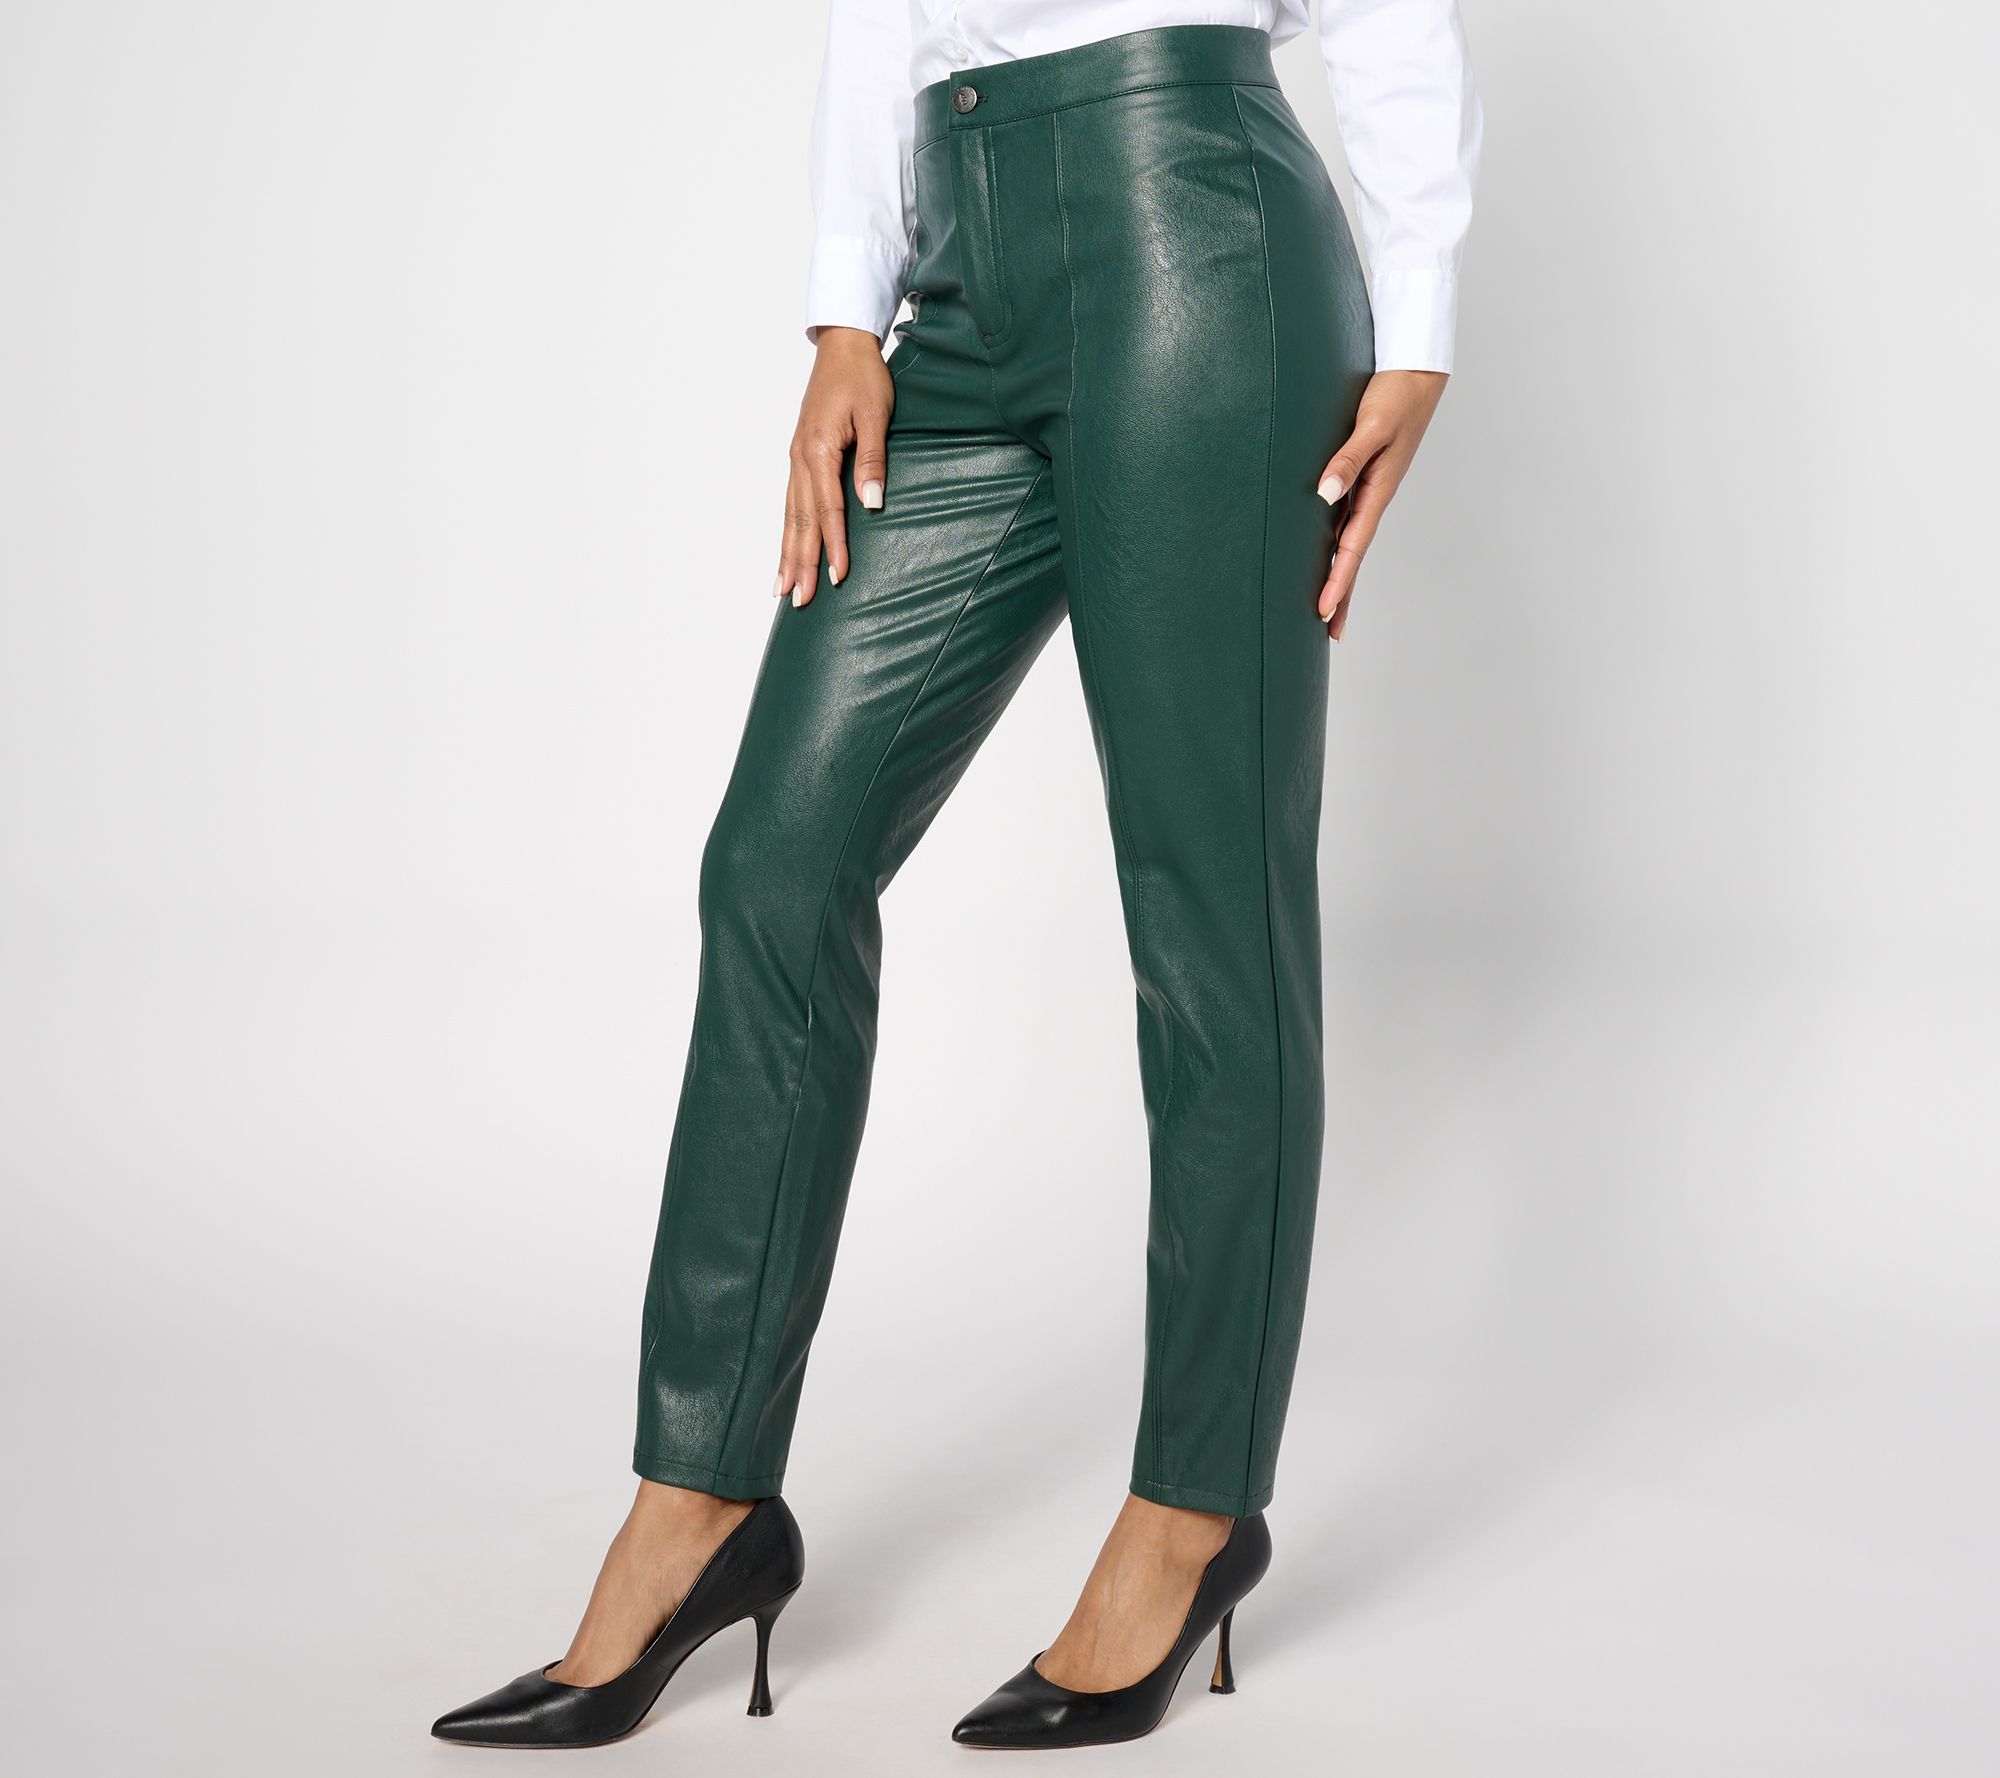 Express  High Waisted Gold Button Knit Trouser Pant in Pitch